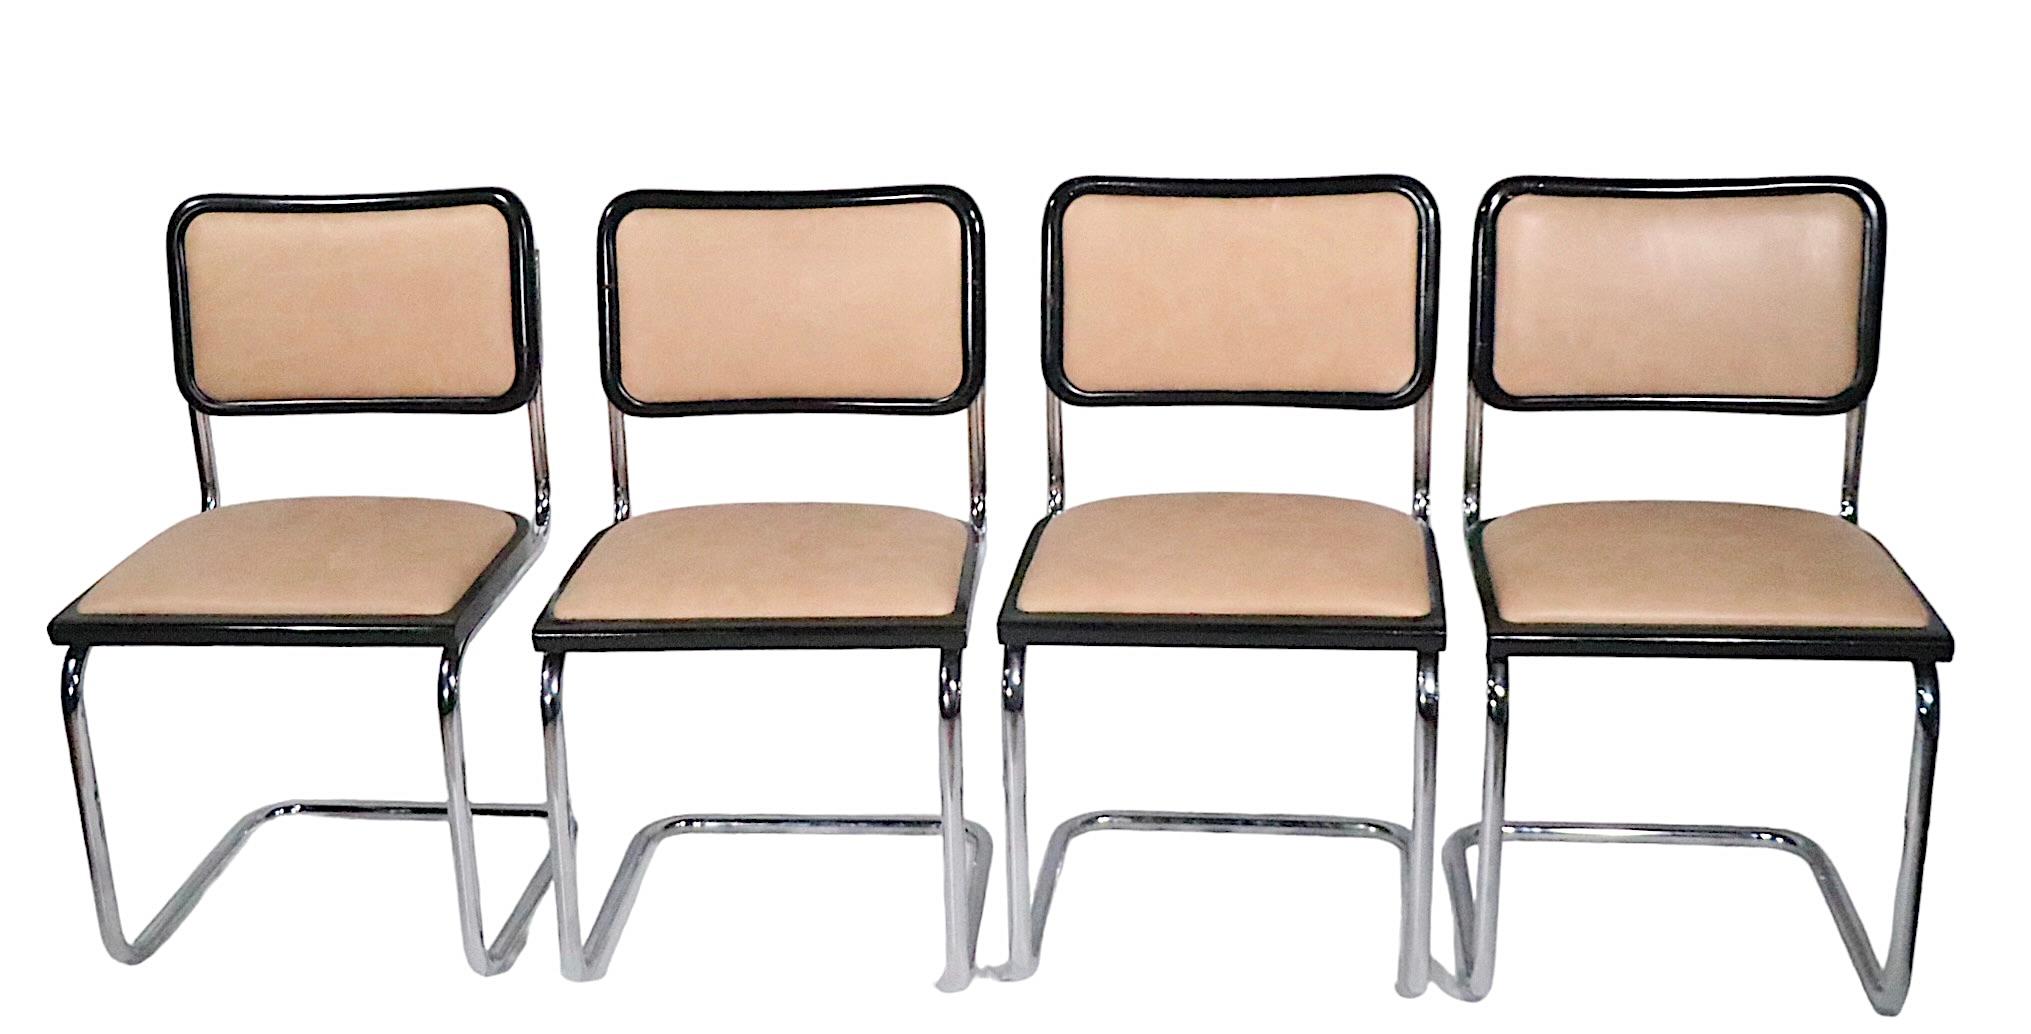 Set of Four Cesca Chairs Made in Italy Designed by Breuer c. 1970s For Sale 6